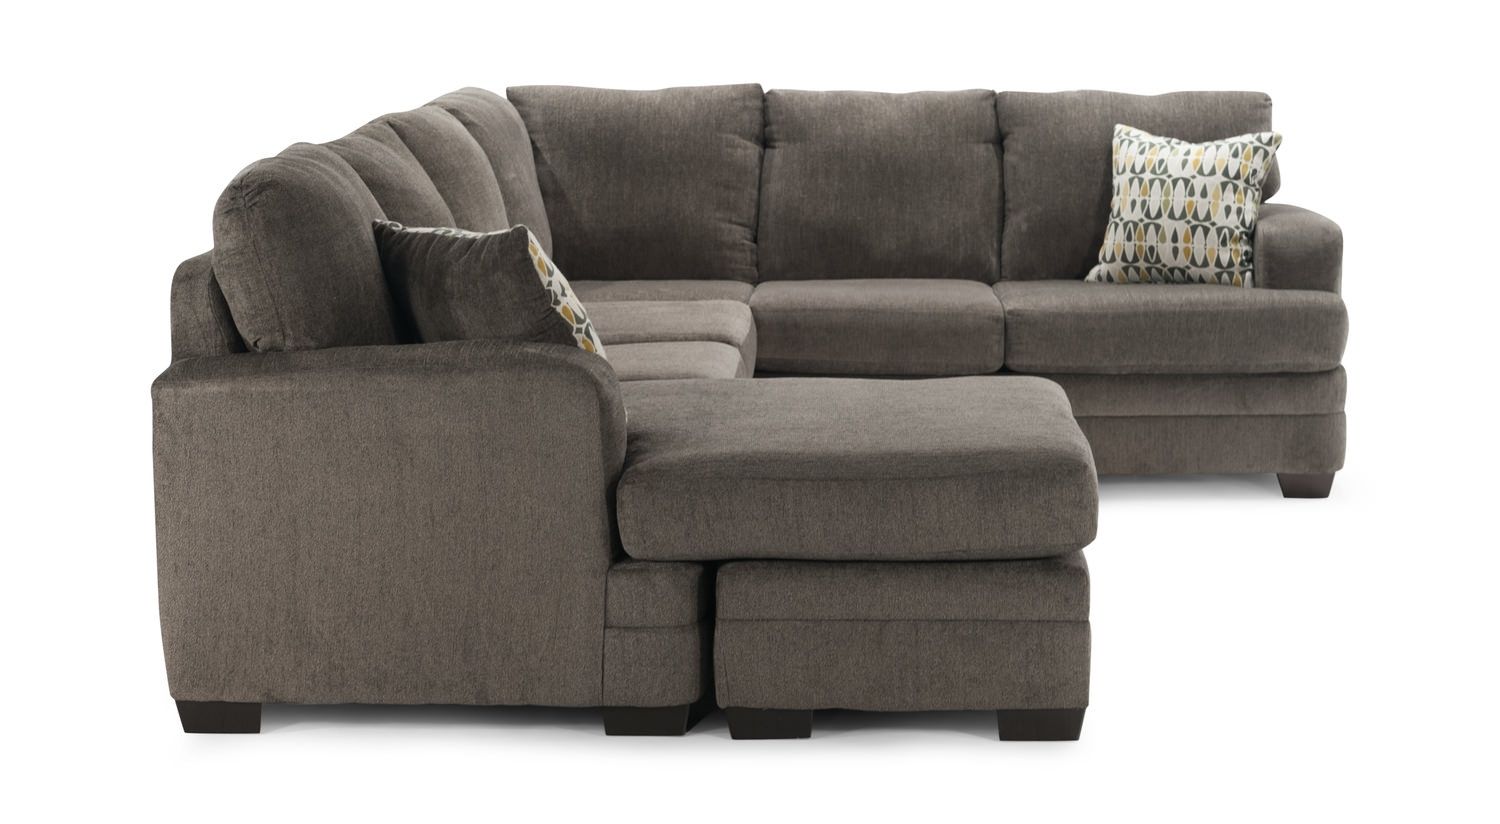 Galena 2 Piece Sectional | Dock86 Within Dock 86 Sectional Sofas (View 10 of 10)